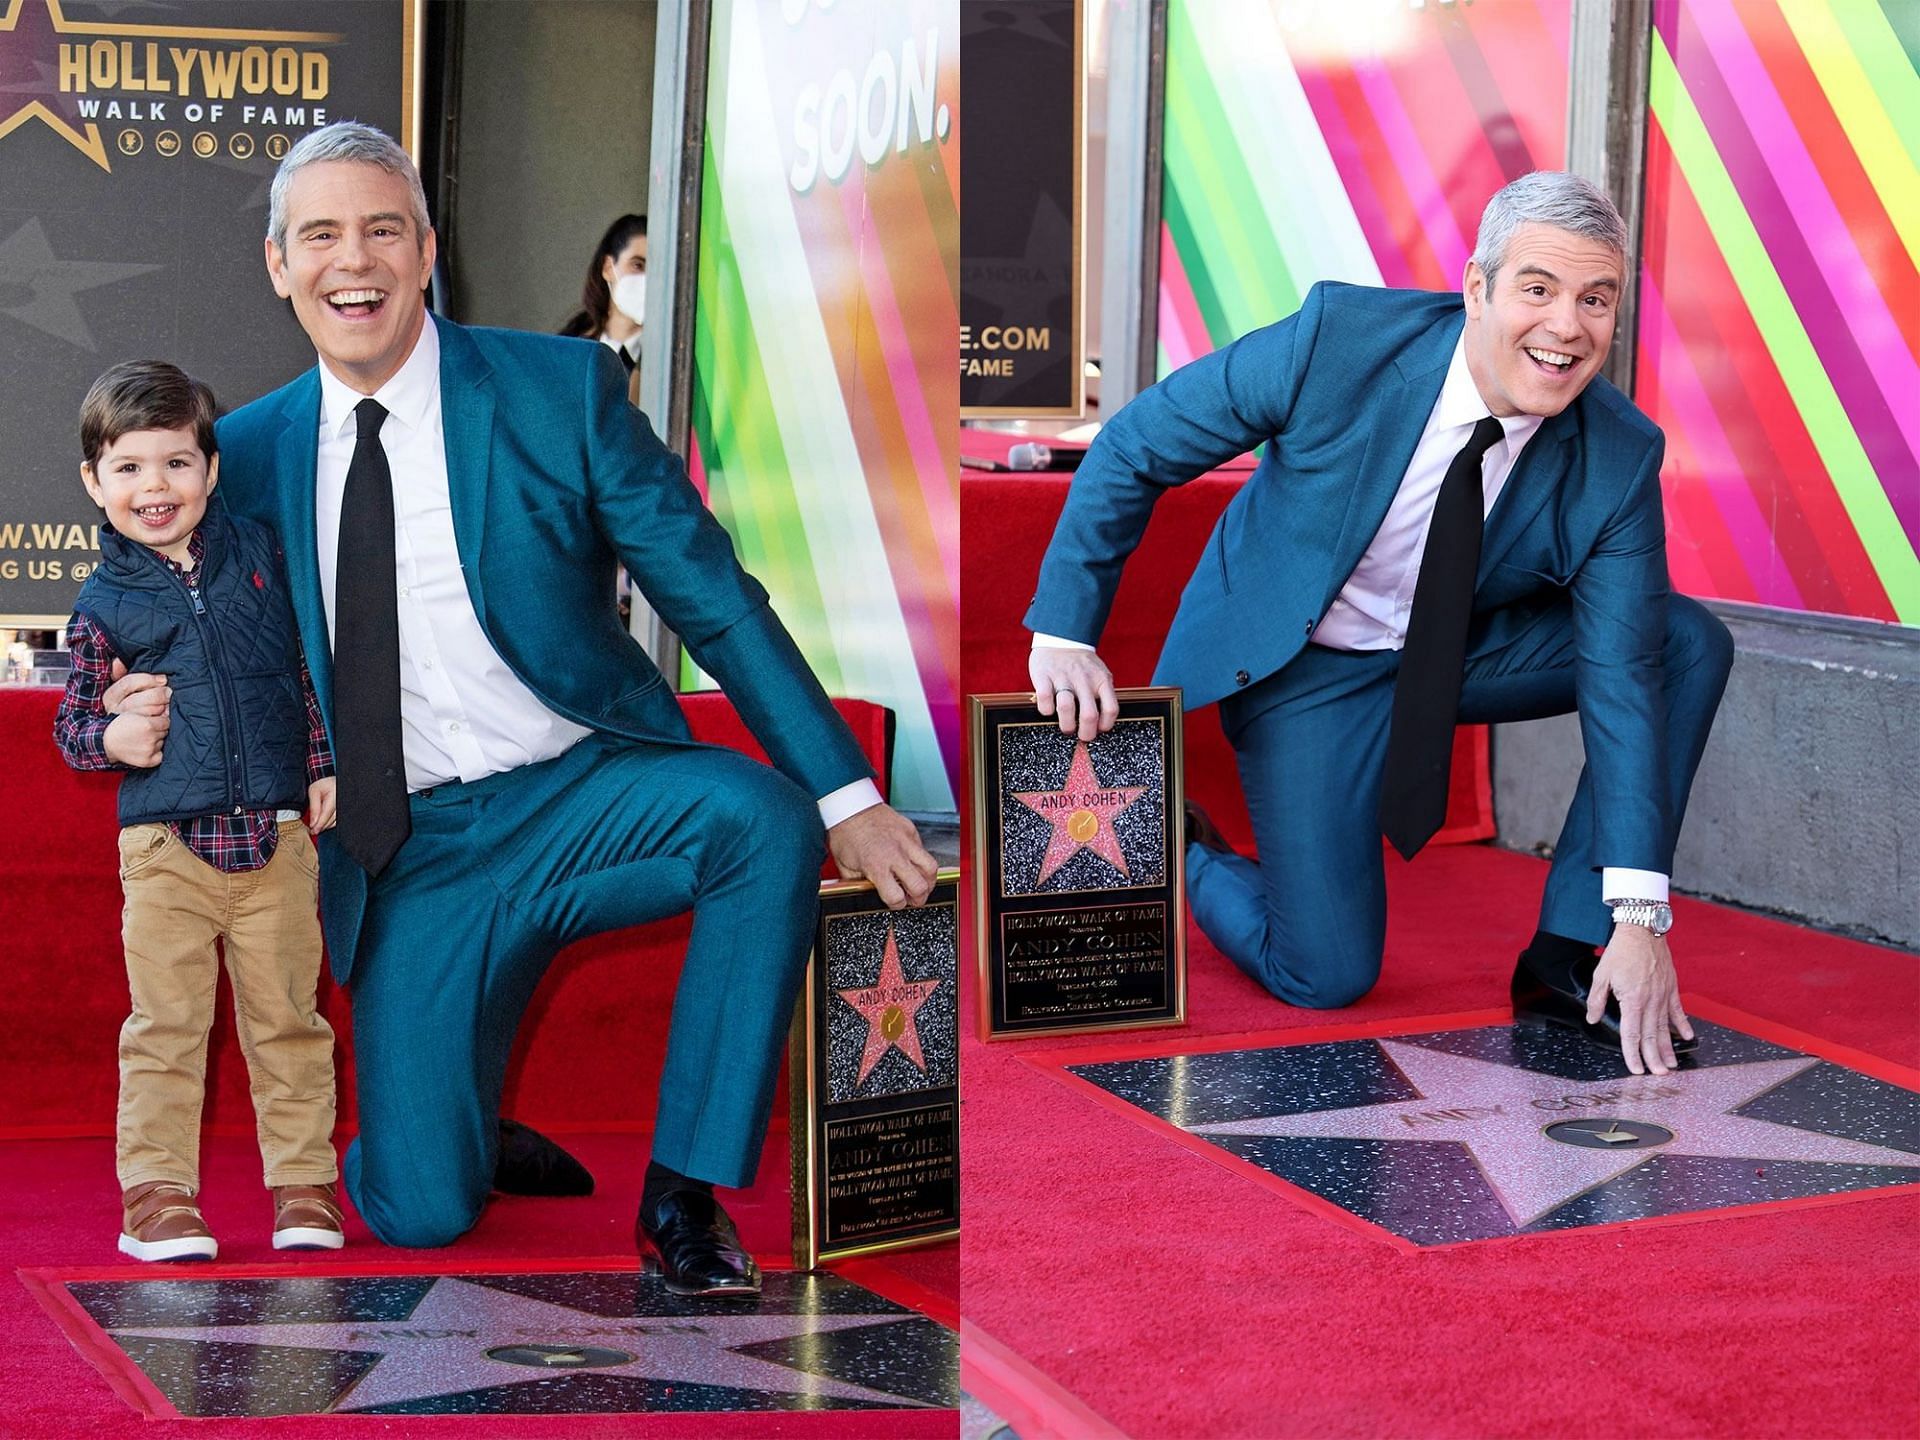 Andy Cohen with his son at the &#039;Walk of Fame&#039; star ceremony (Image via Alerie Macon/AFP/Getty Images, and Amy Sussman/Getty Images)